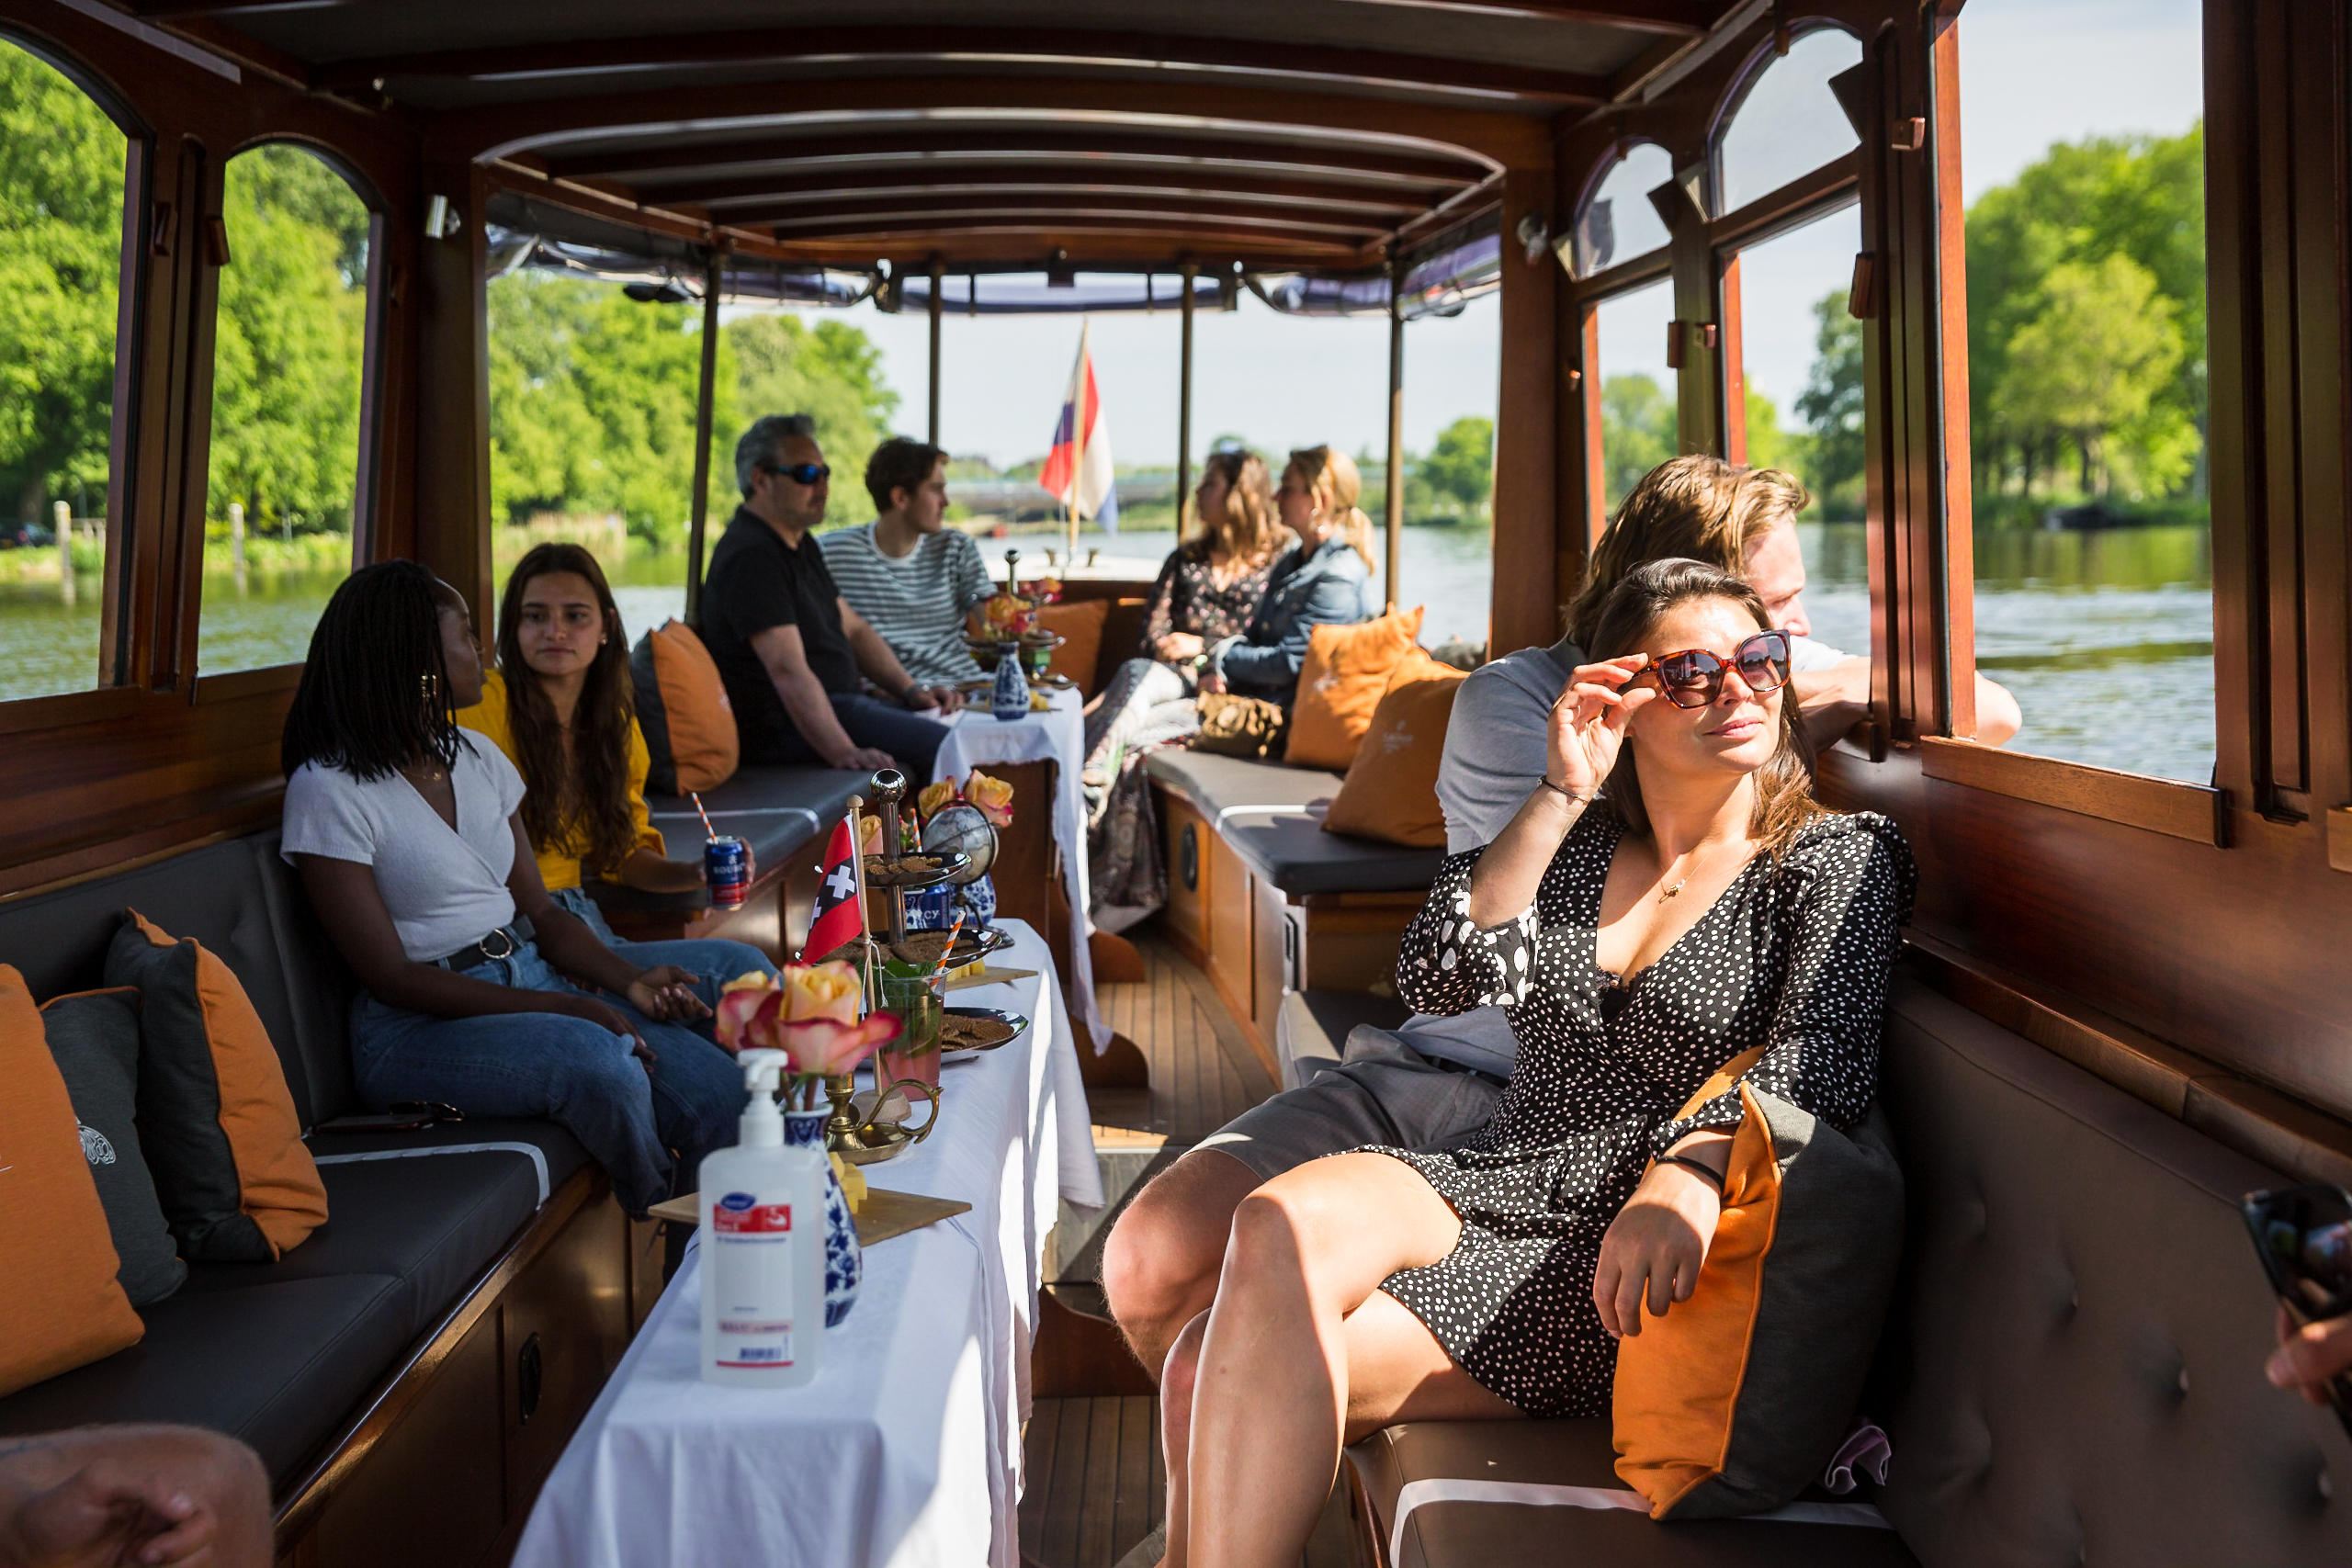 Luxury Boat Tour in Amsterdam